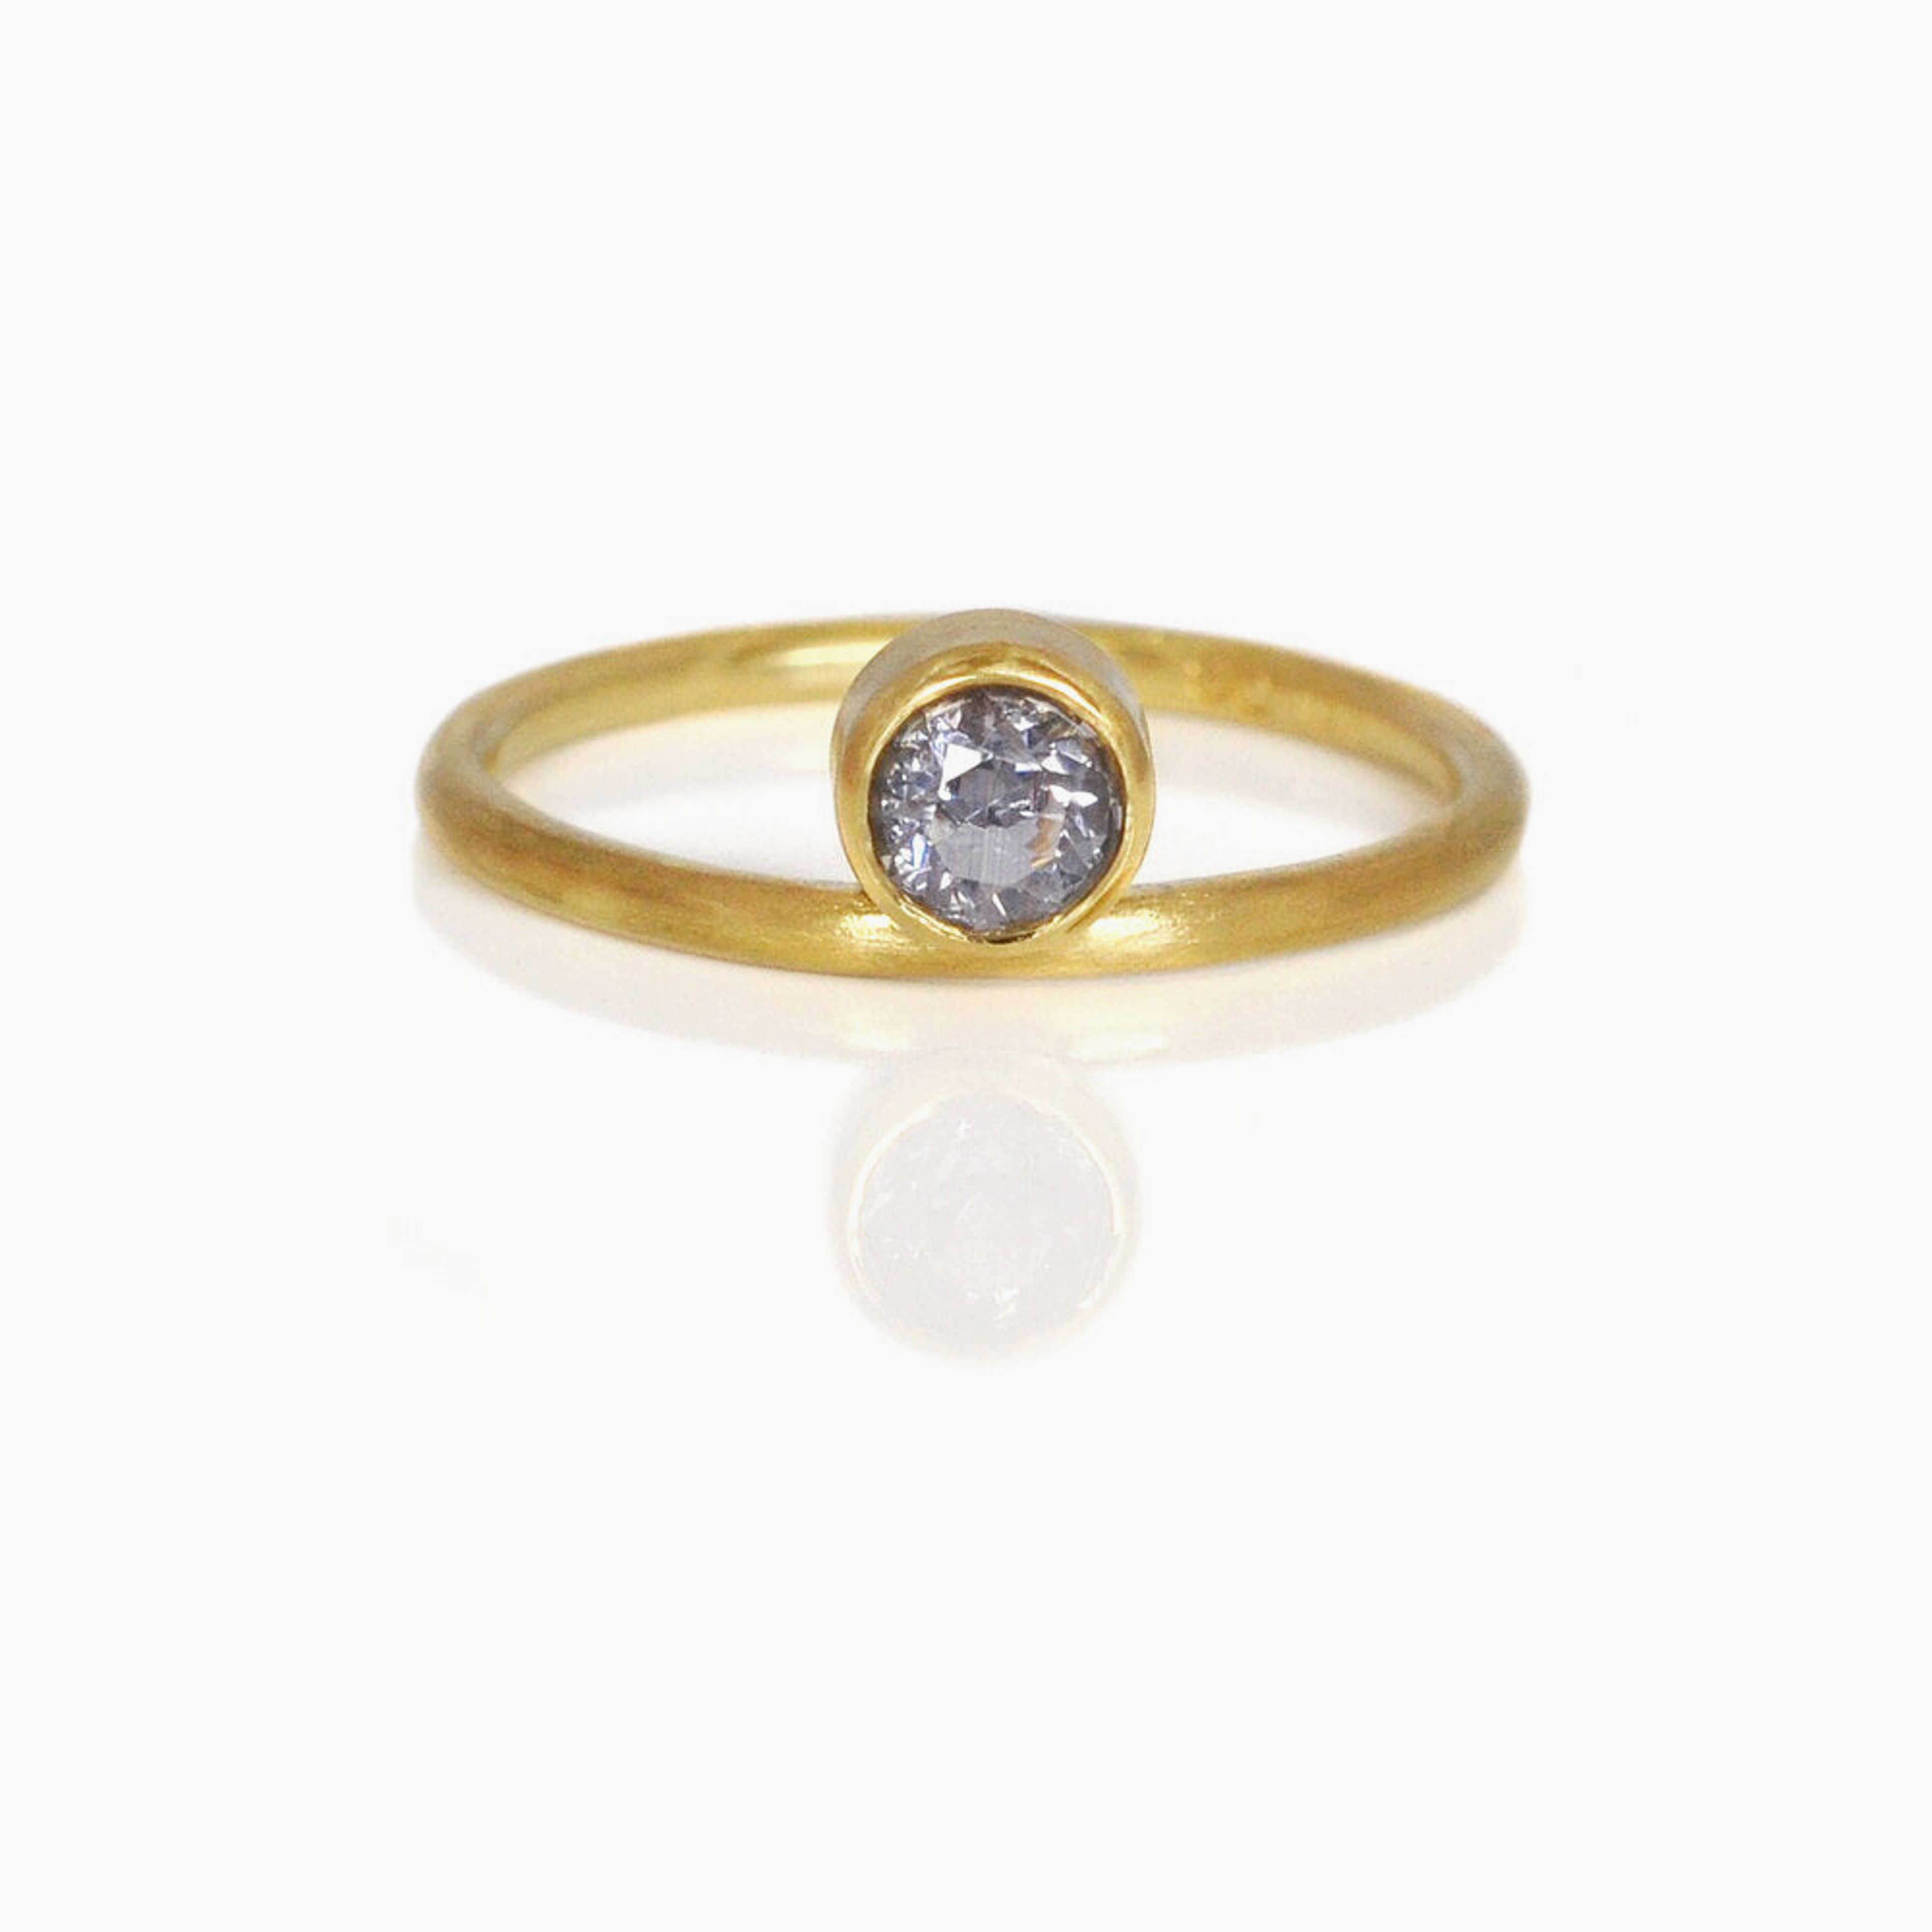 Lavender Brilliant Cut Sapphire Ring in Yellow Gold